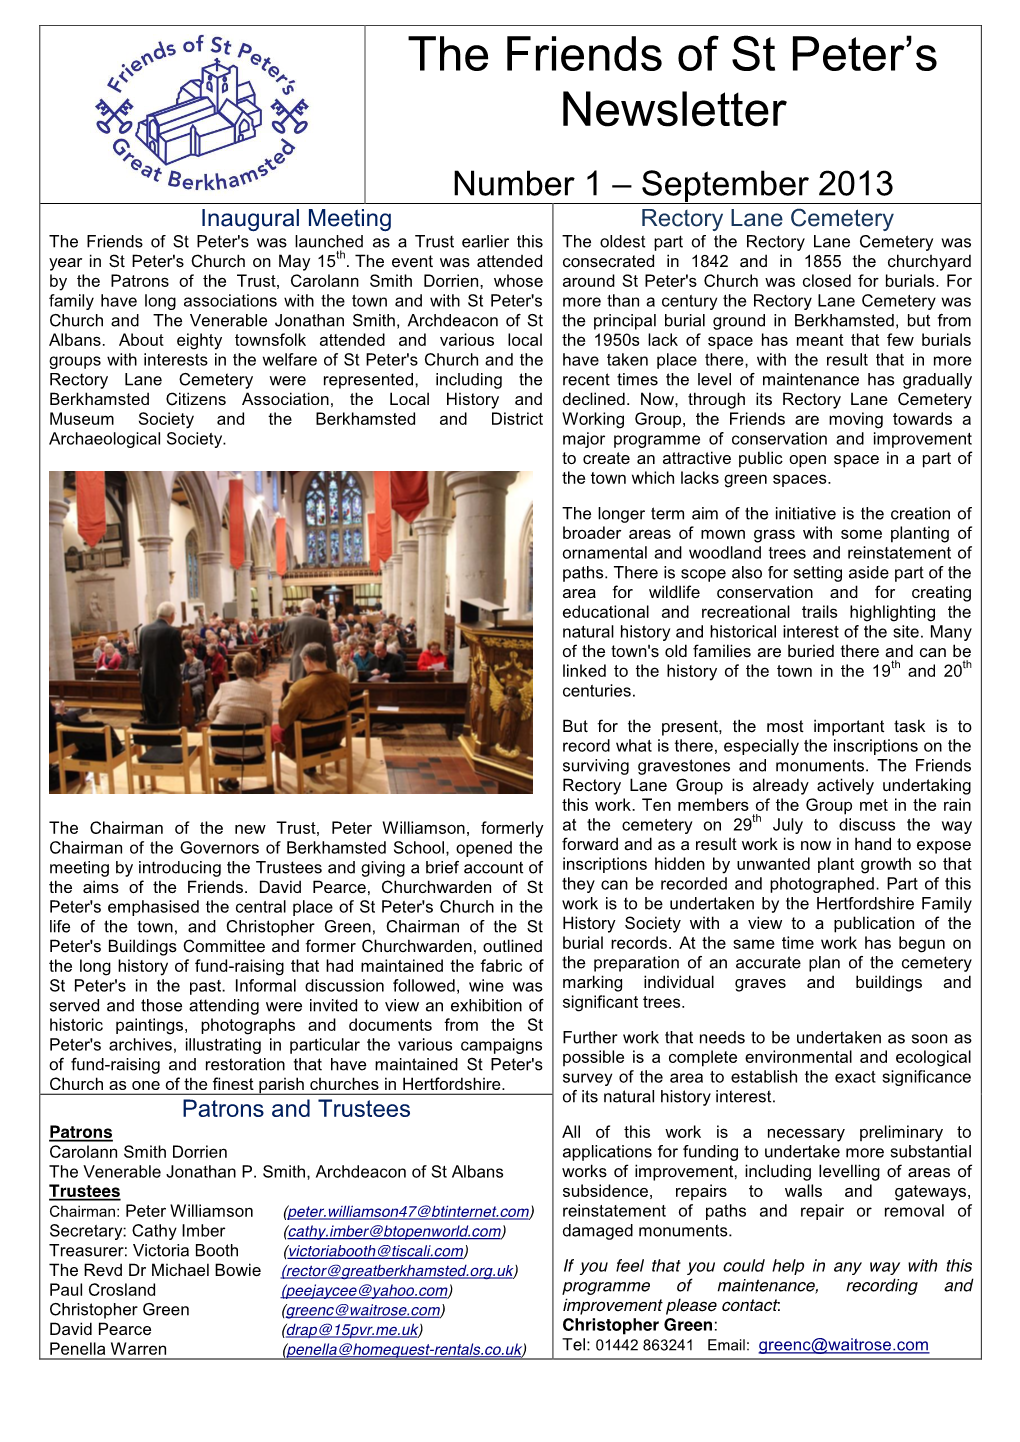 The Friends of St Peter's Newsletter